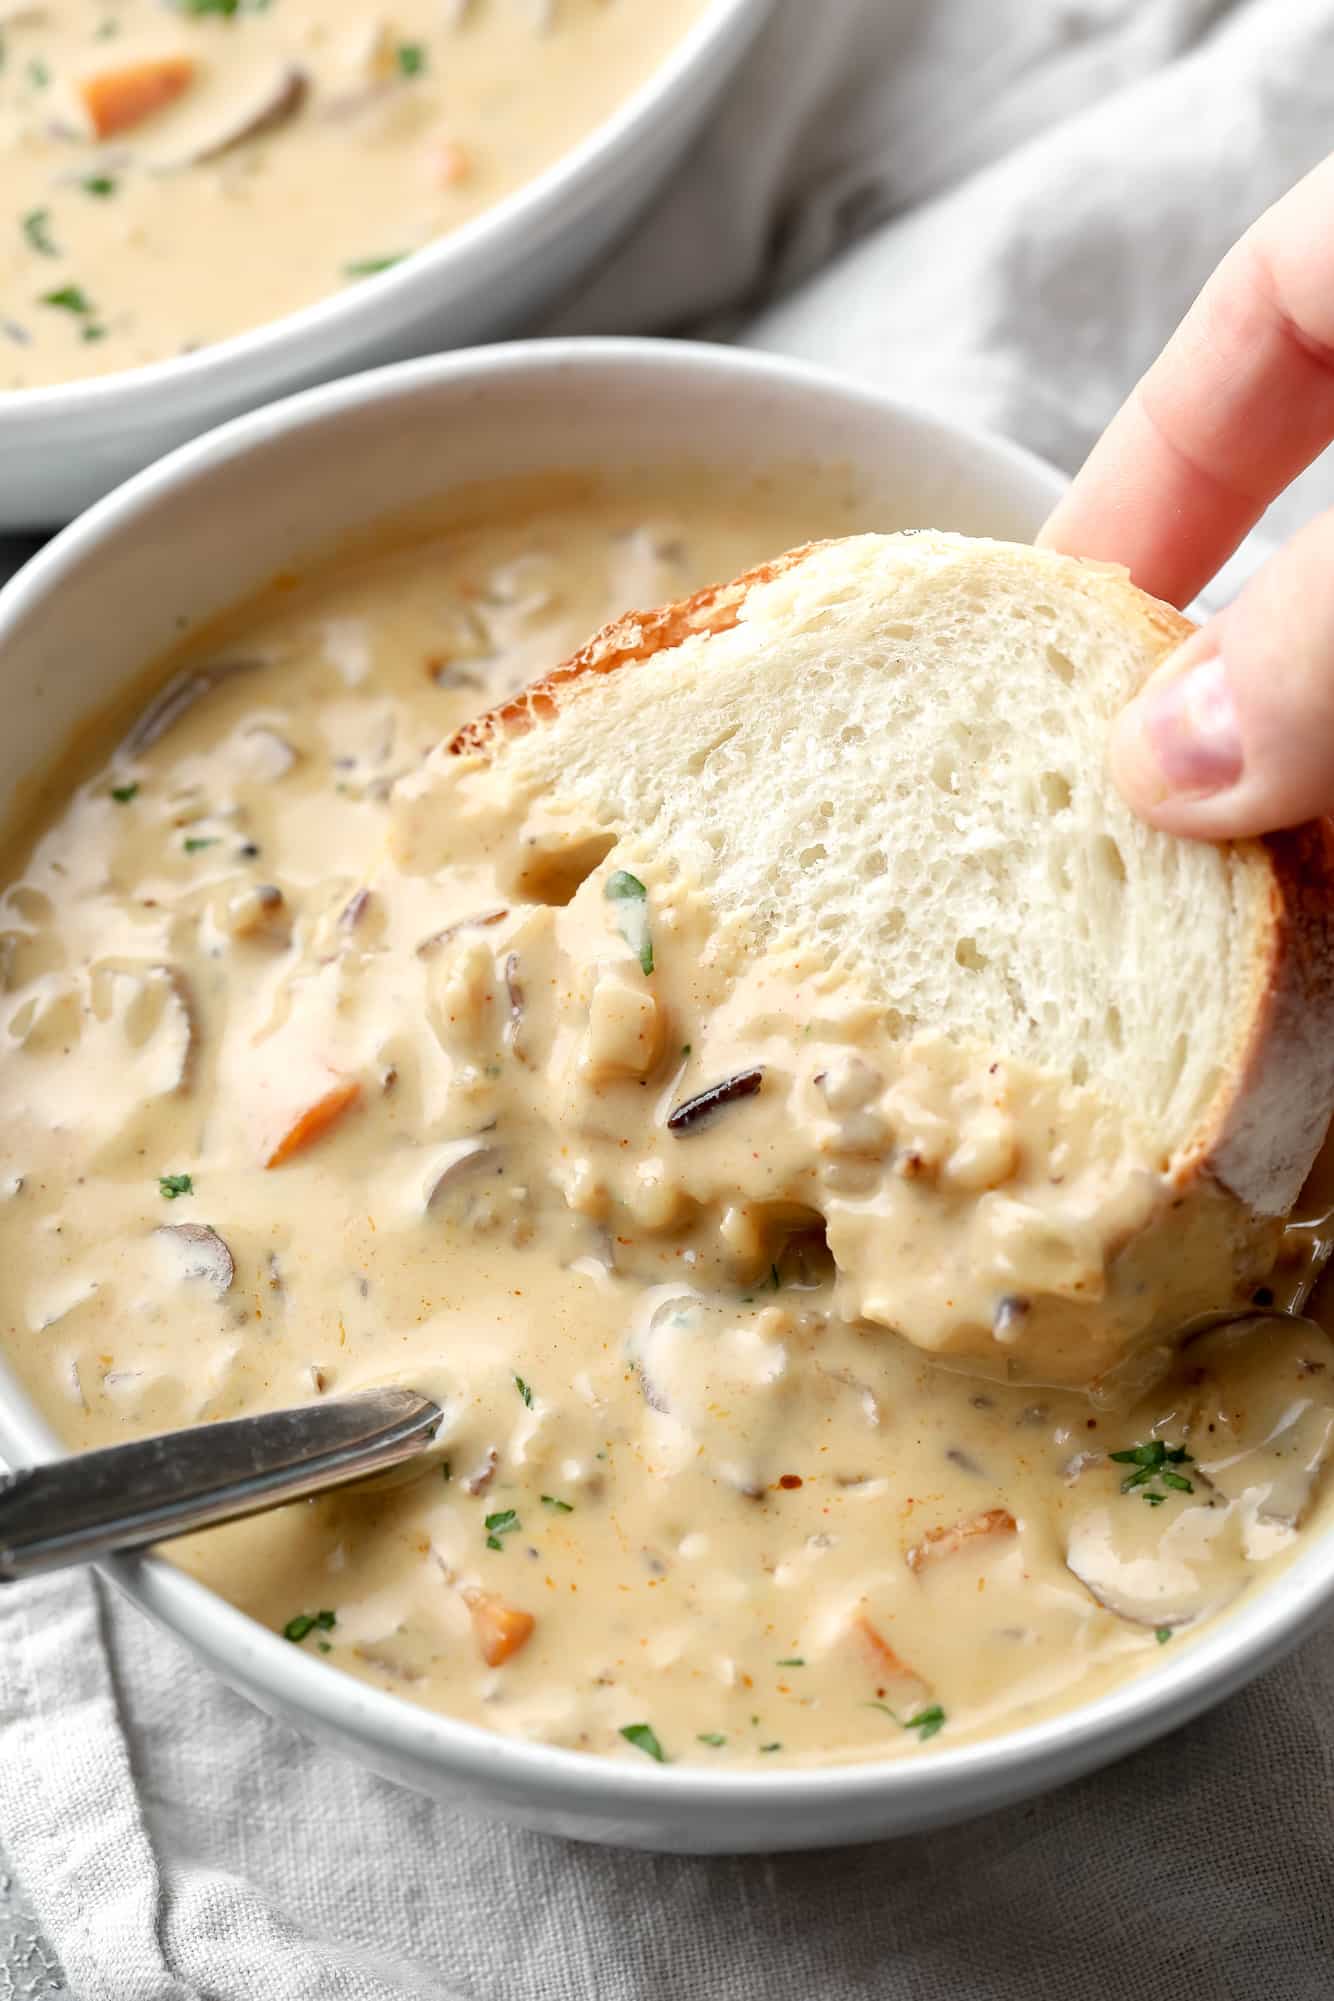 womans hand dipping a piece of bread into a bowl of vegan mushroom soup.